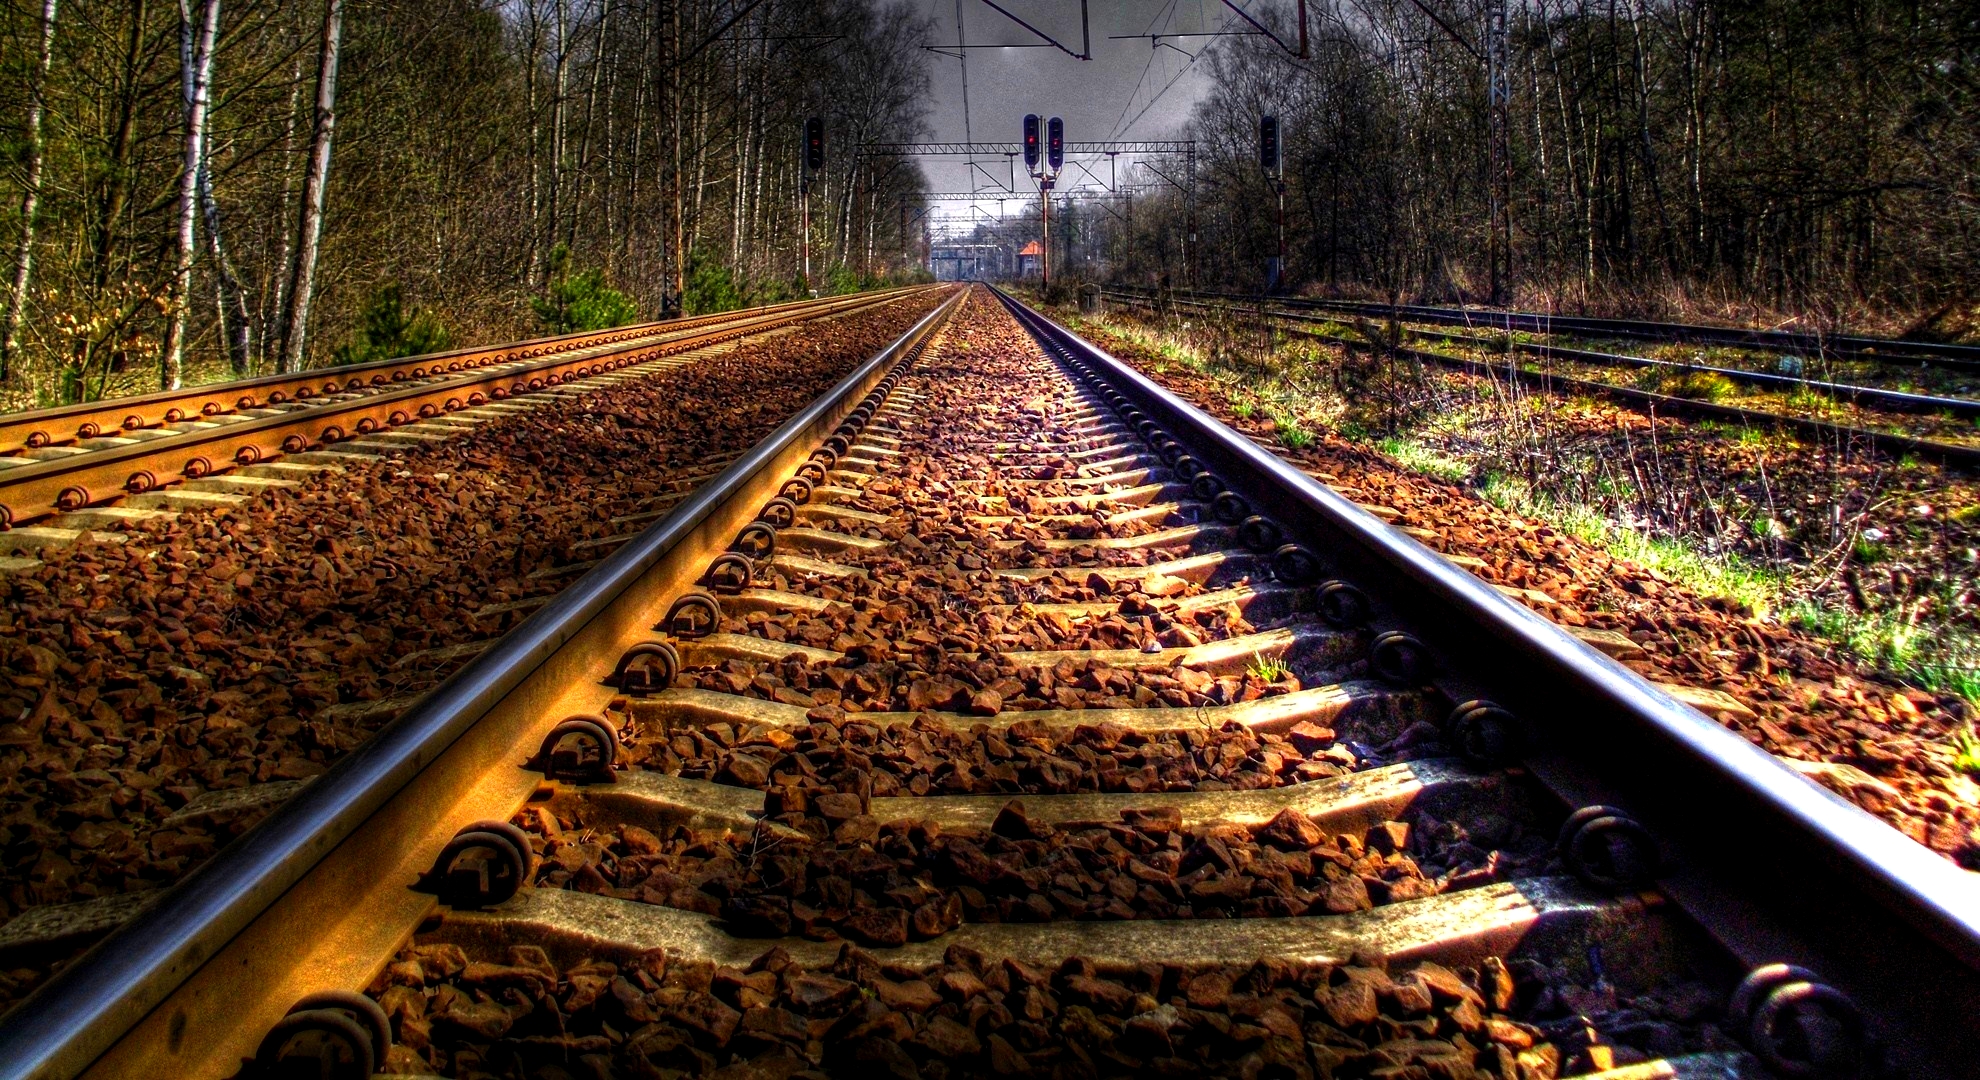  under the train wallpapers category of free hd wallpapers train track